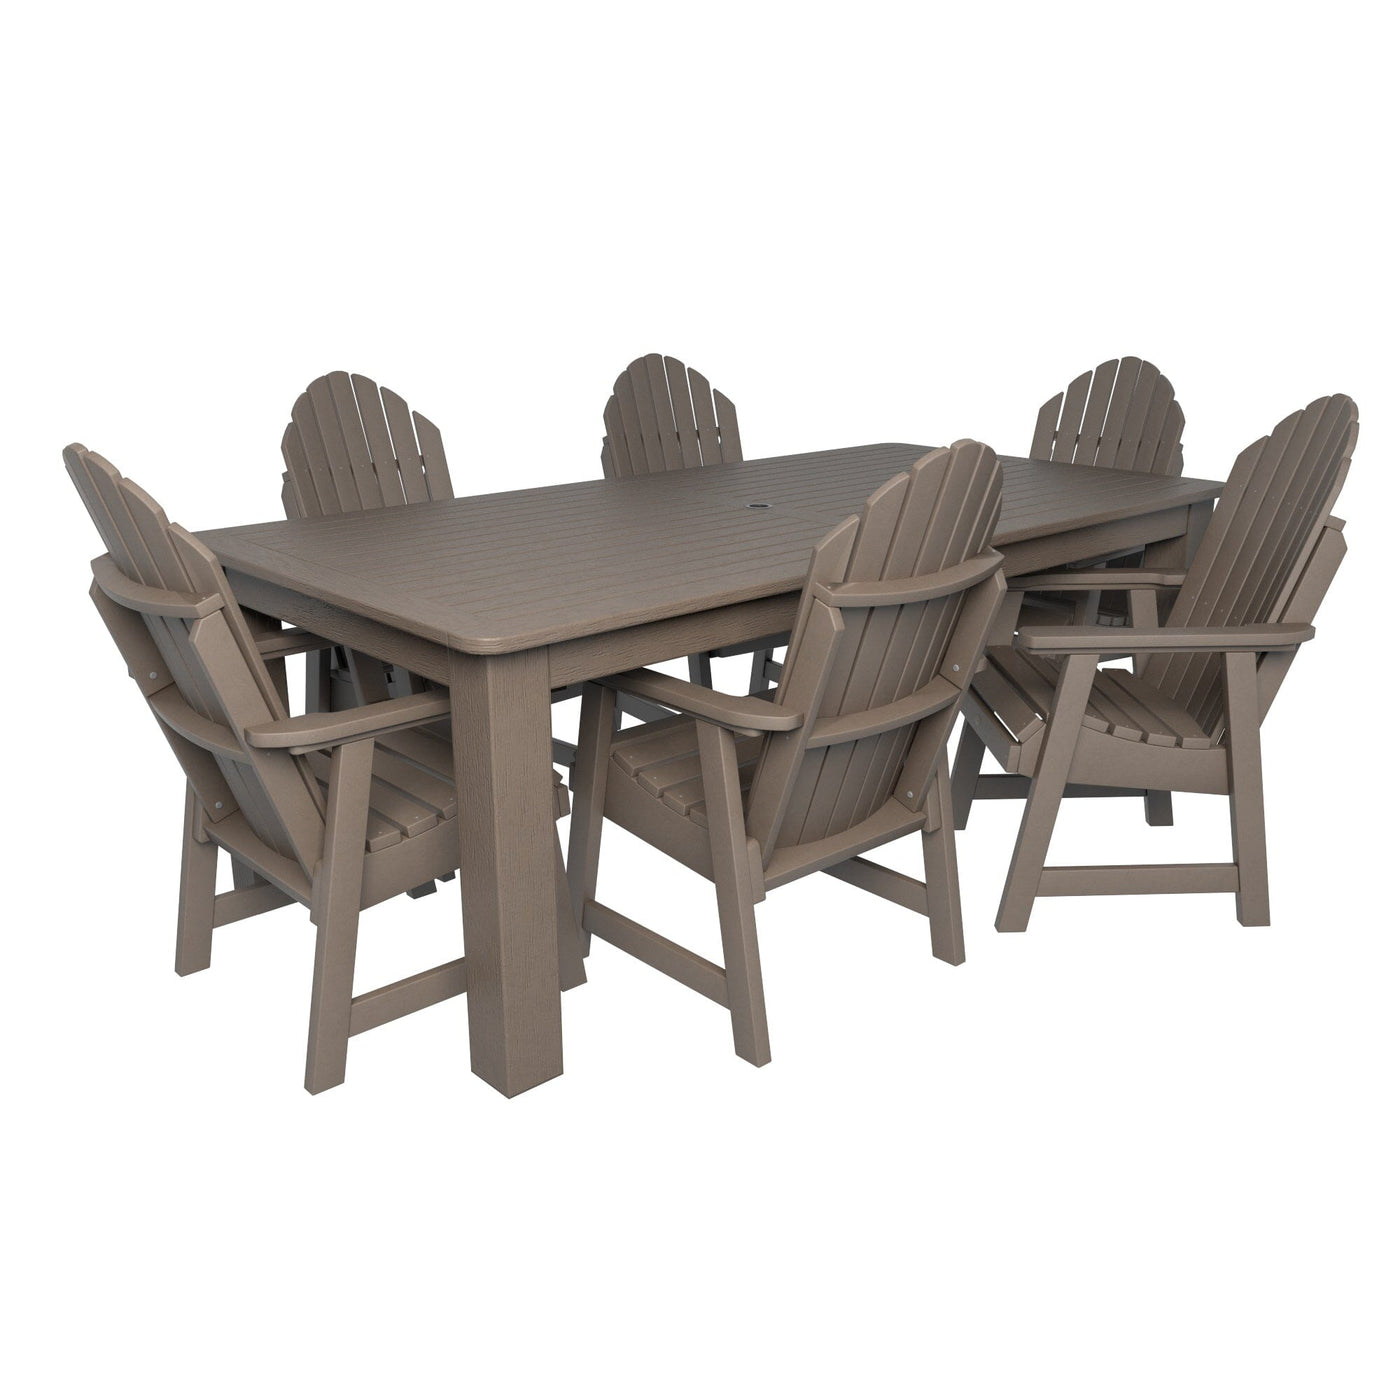 Hamilton 7pc Rectangular Outdoor Dining Set 42in x 84in - Dining Height Dining Highwood USA Woodland Brown 